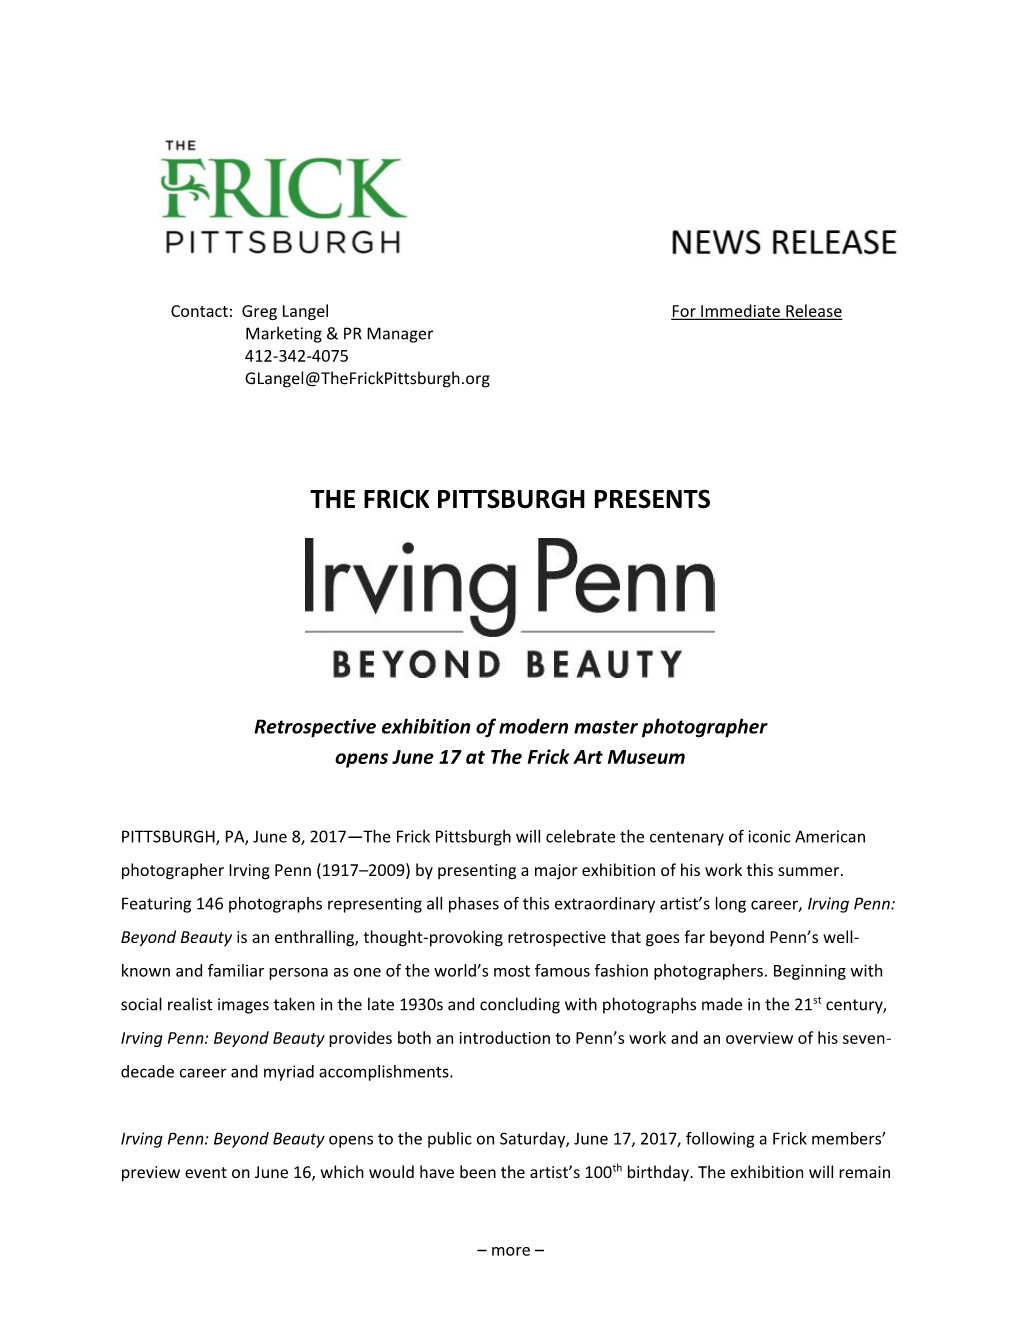 The Frick Pittsburgh Presents Irving Penn